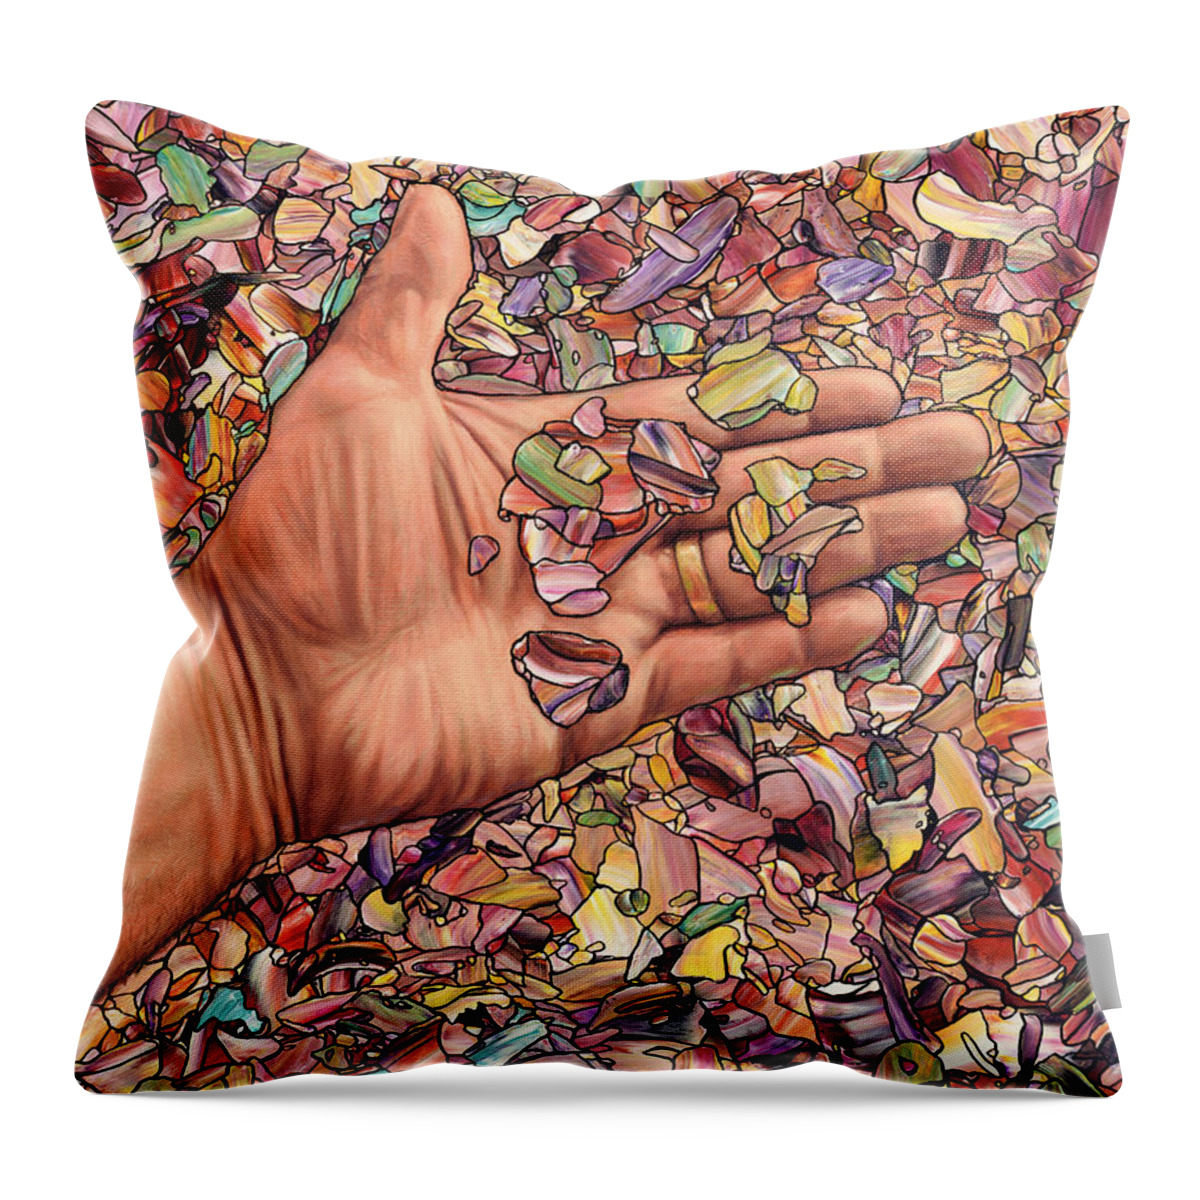 Abstract Throw Pillow featuring the painting Fragmented Touch by James W Johnson